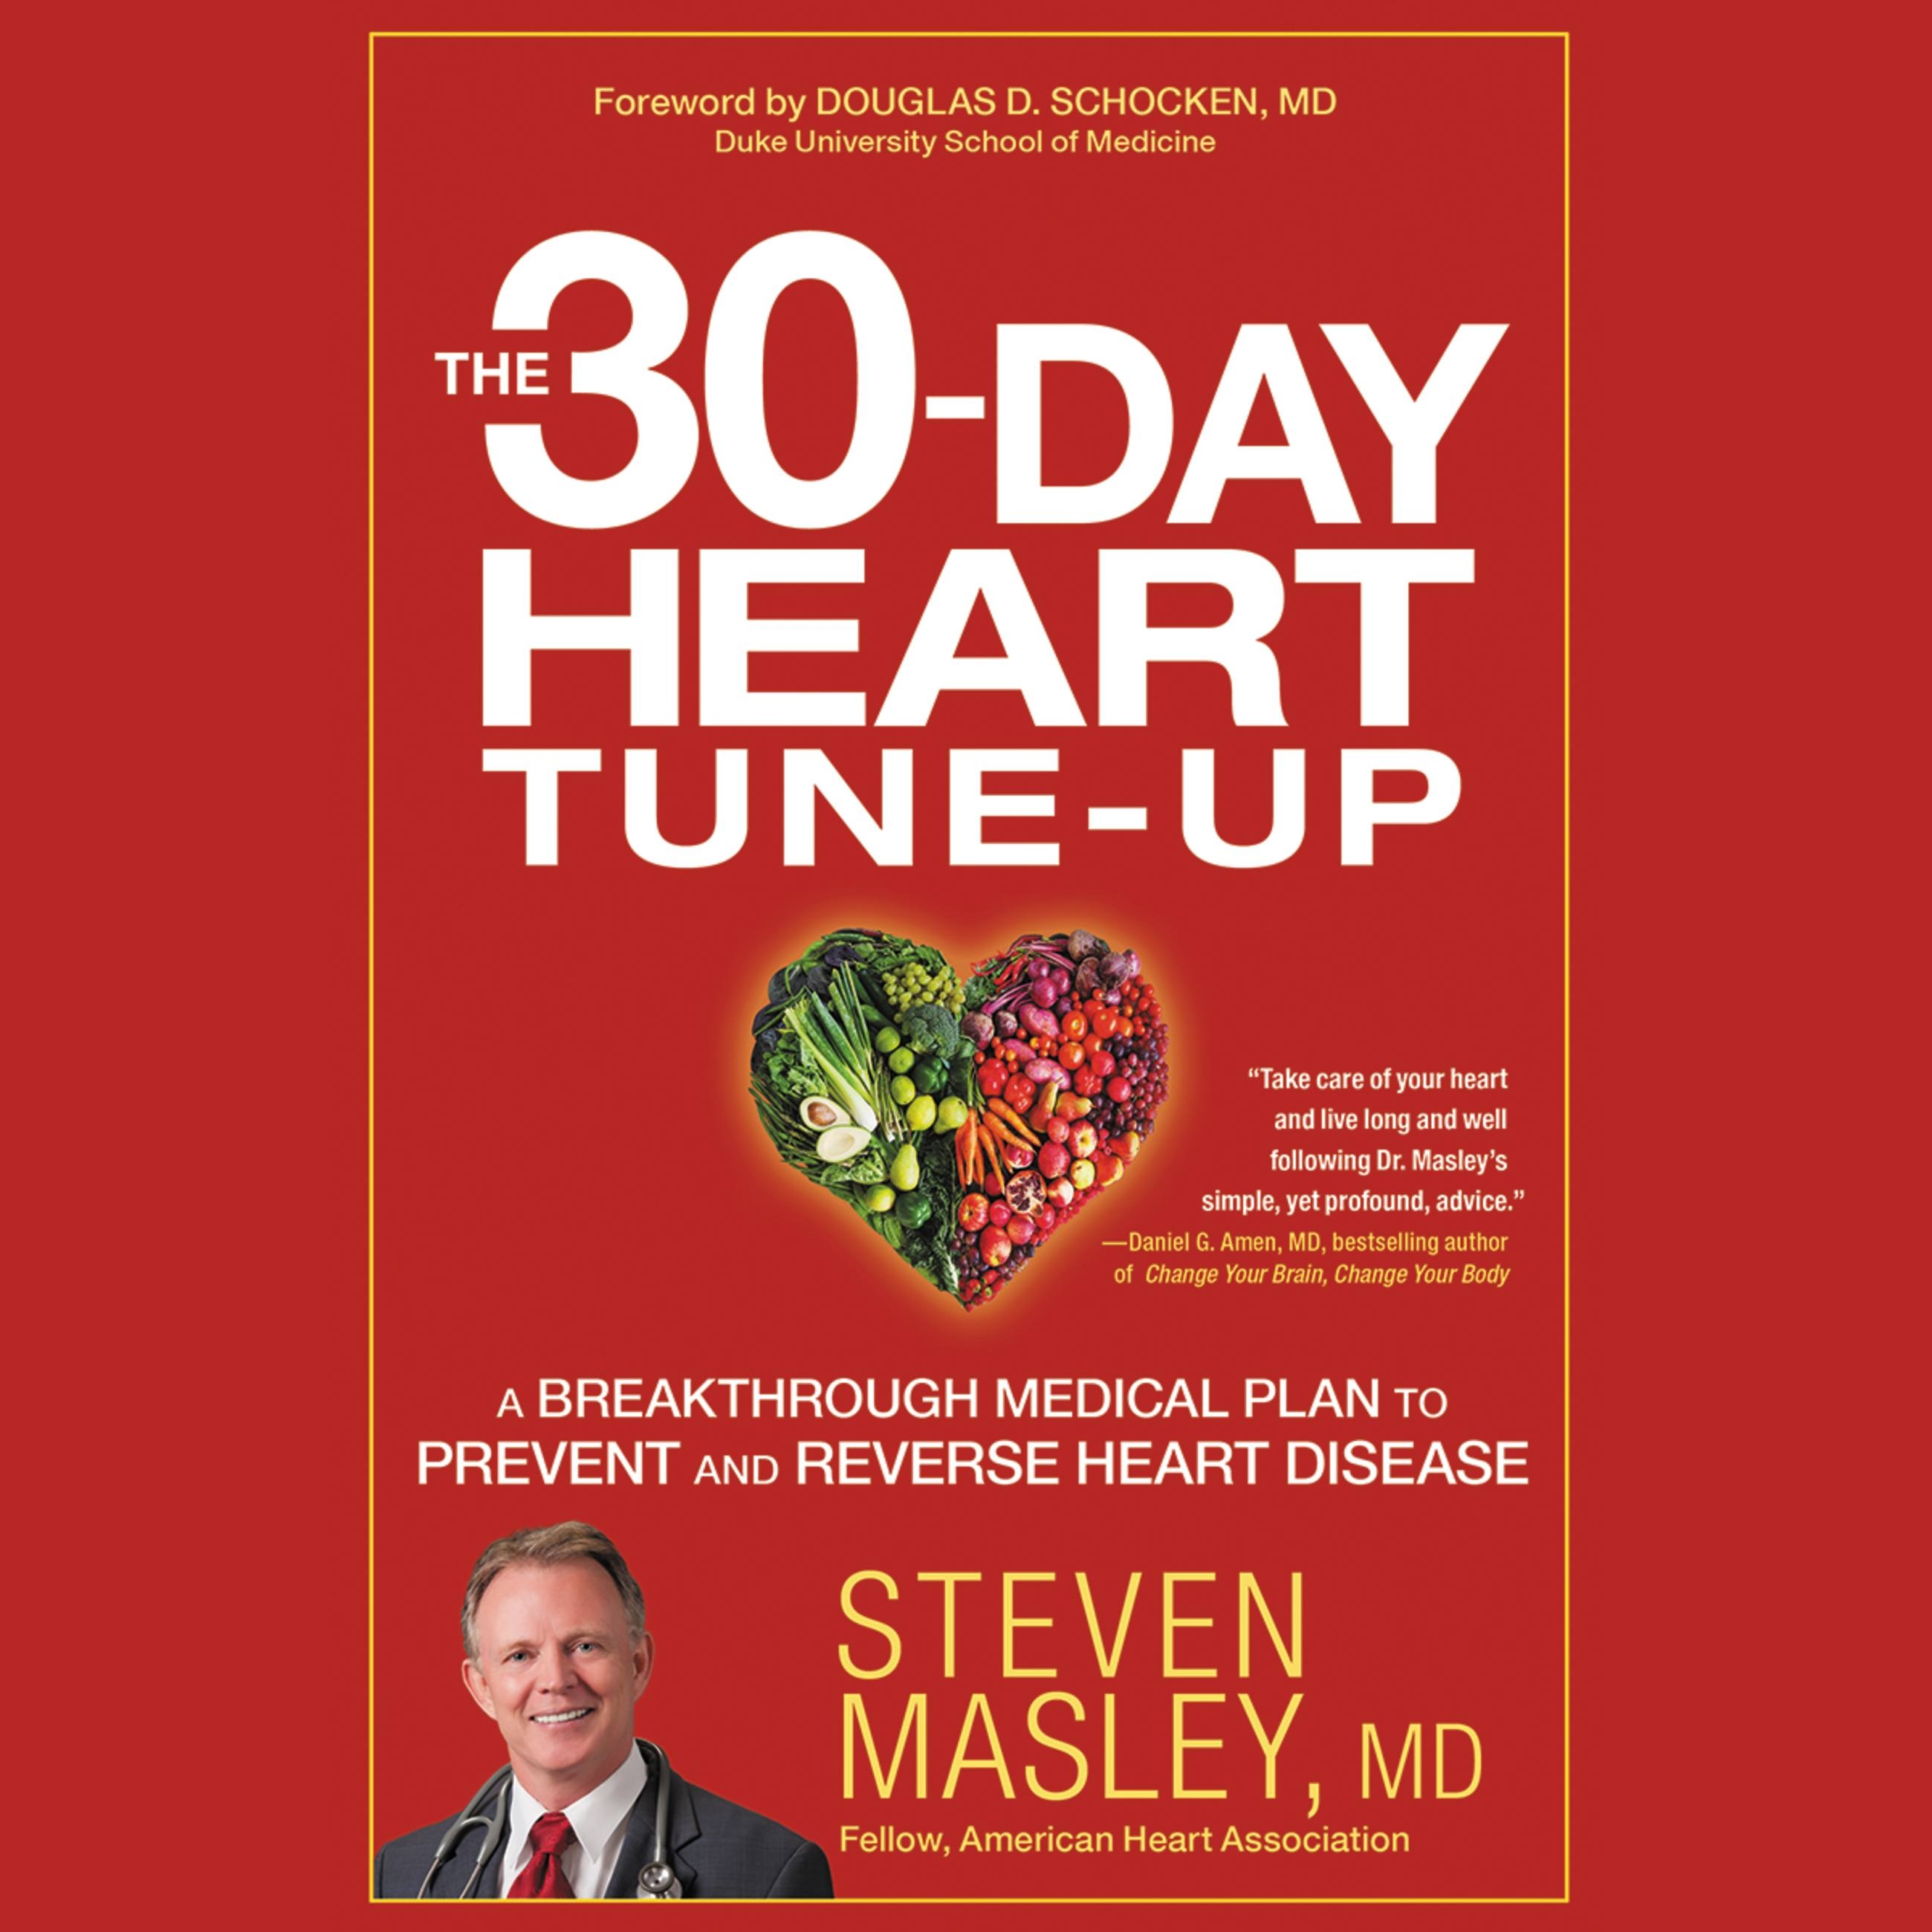 Tuned heart. The 30-Day Heart Tune-up.